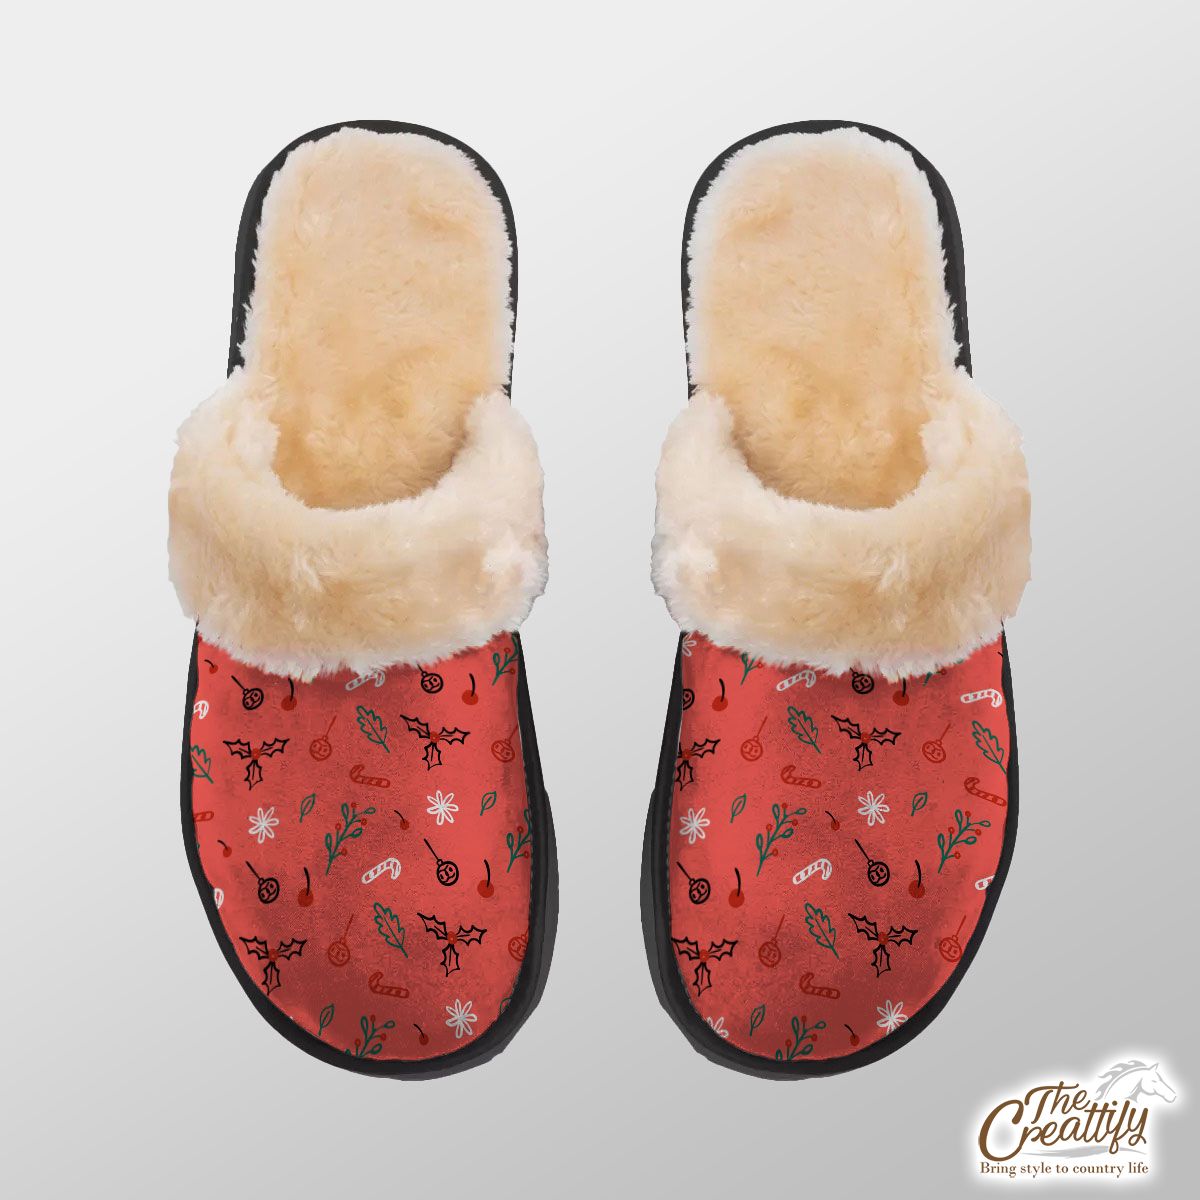 Christmas Lights, Candy Cane And Holly Tree  2 Home Plush Slippers